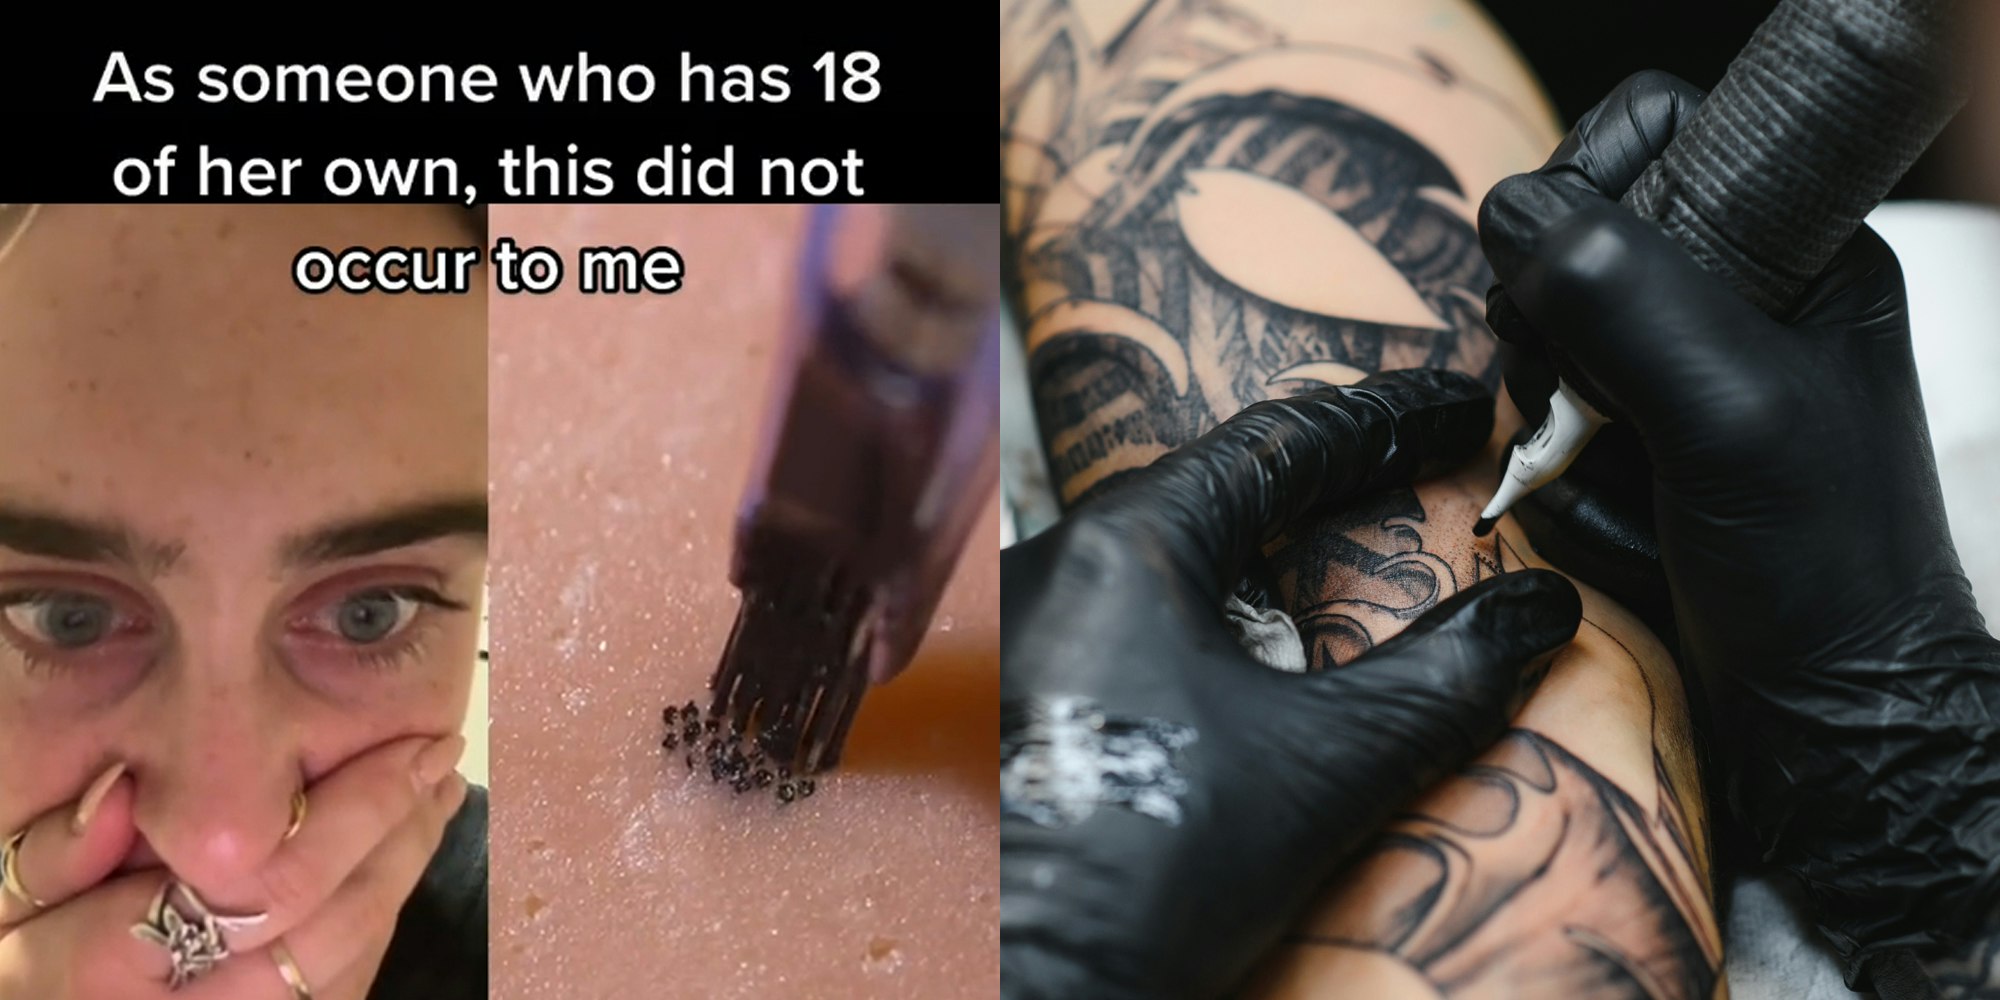 Viral TikTok Shows Close-Up of Tattoo Being Done